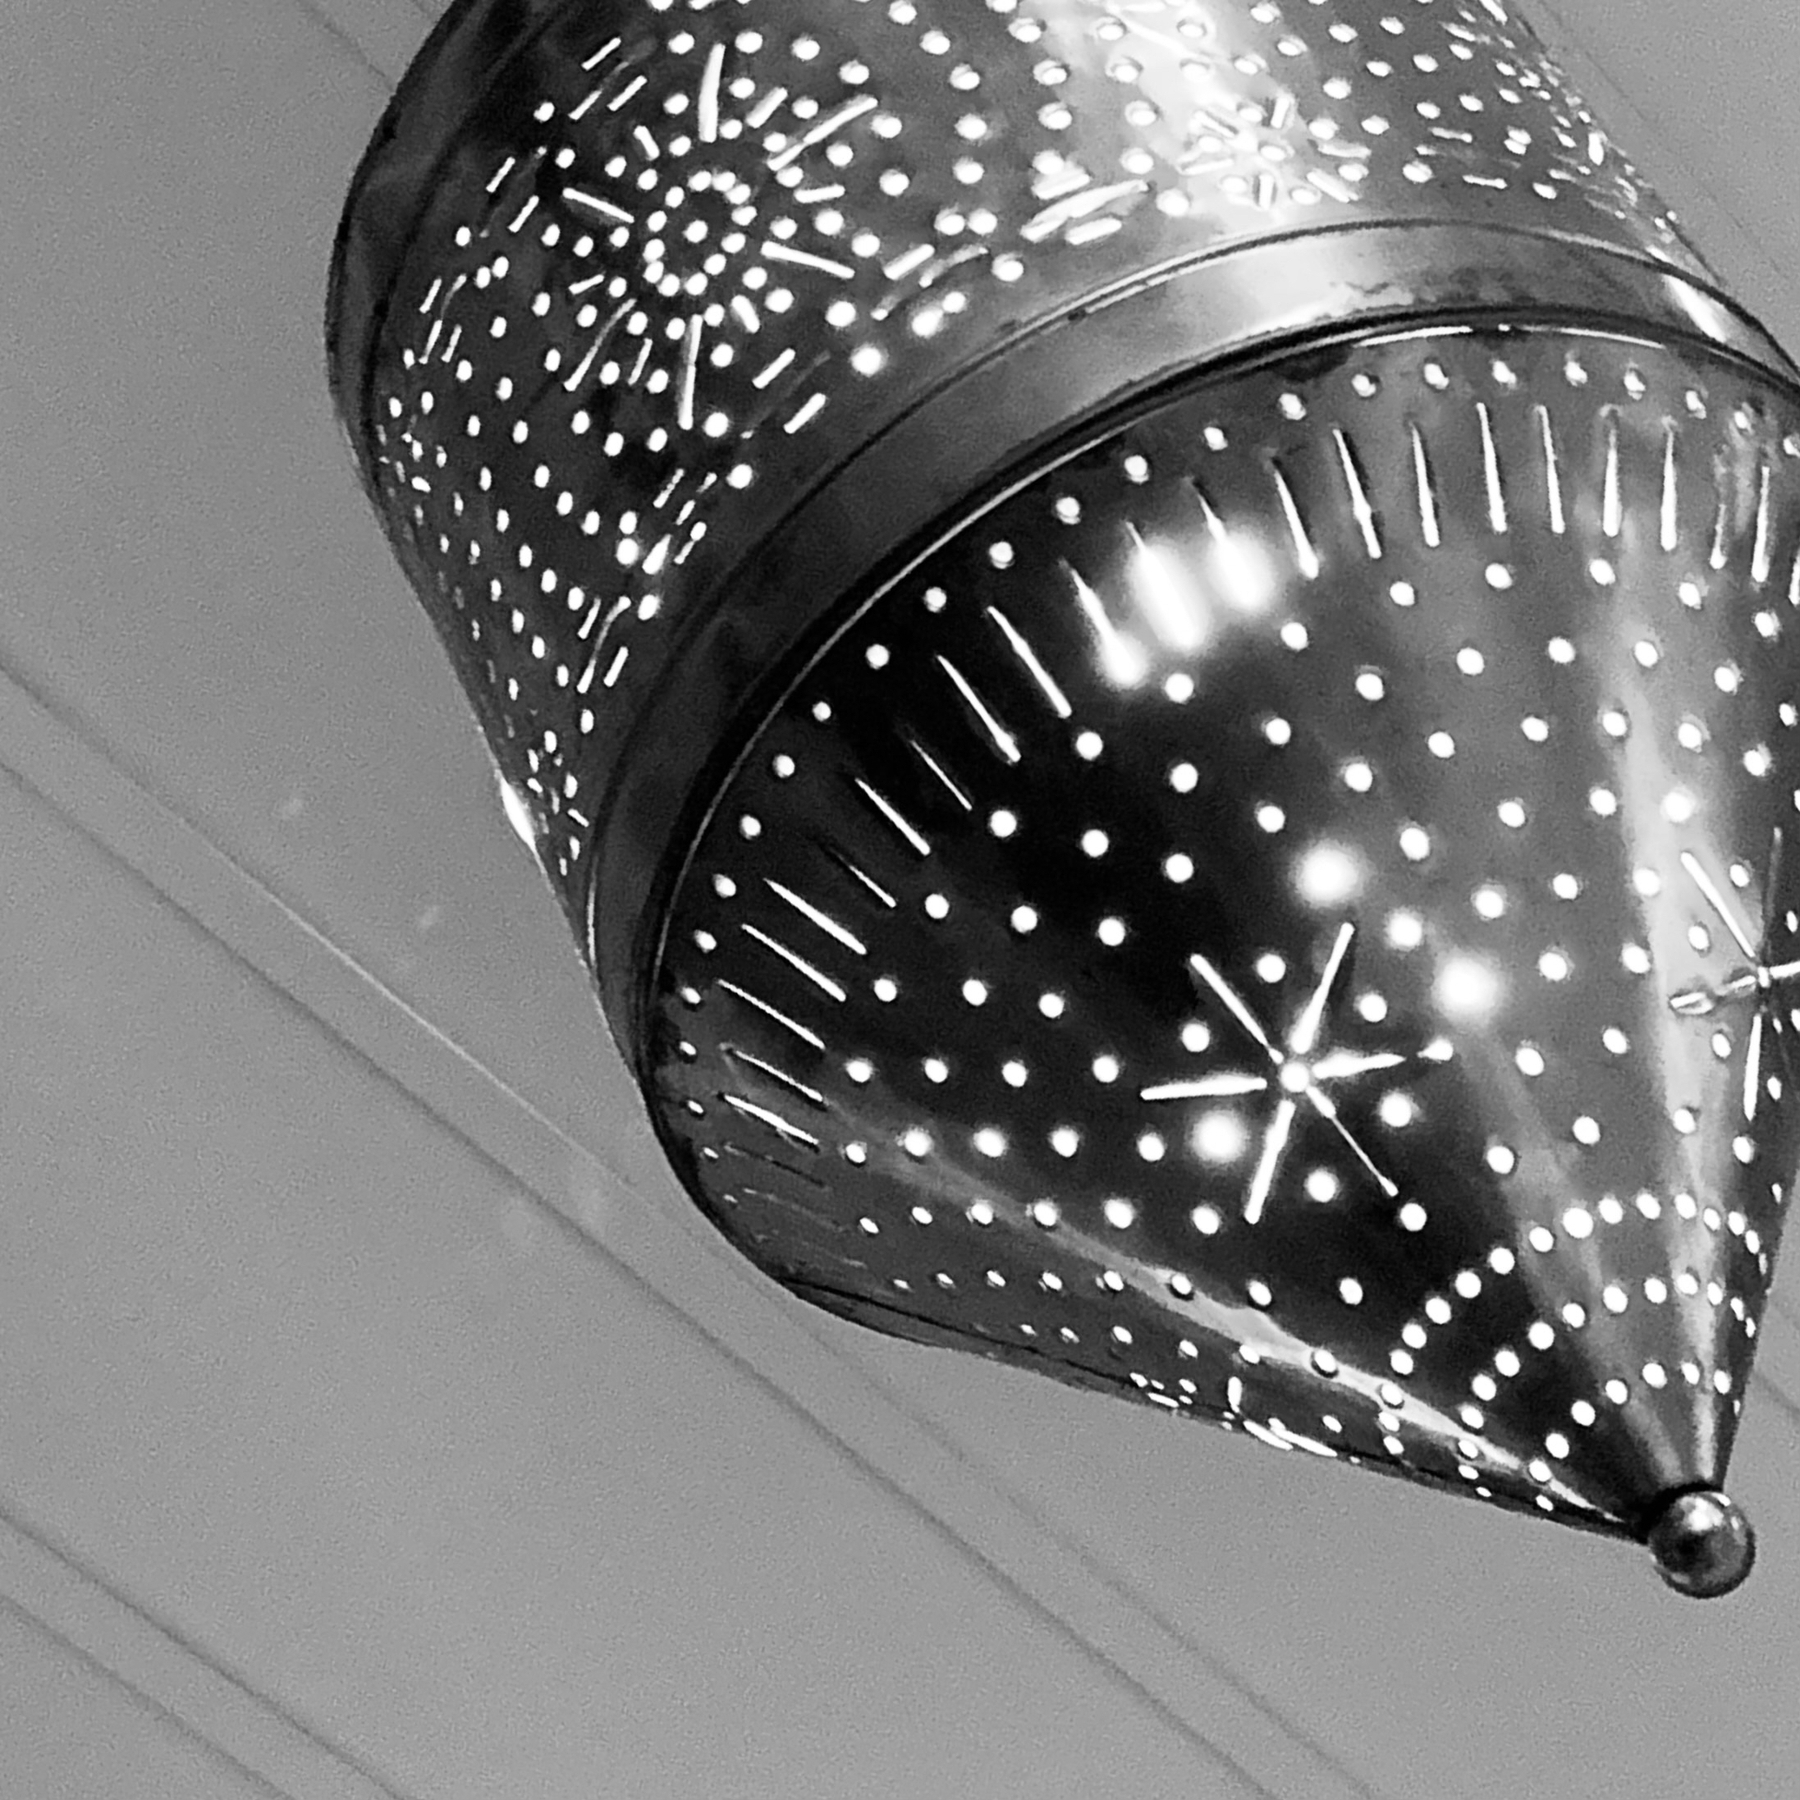 A metal lantern with holes, framed in a way that makes it look like a mole. The lantern is creating lots of interesting points of light through the holes. ￼